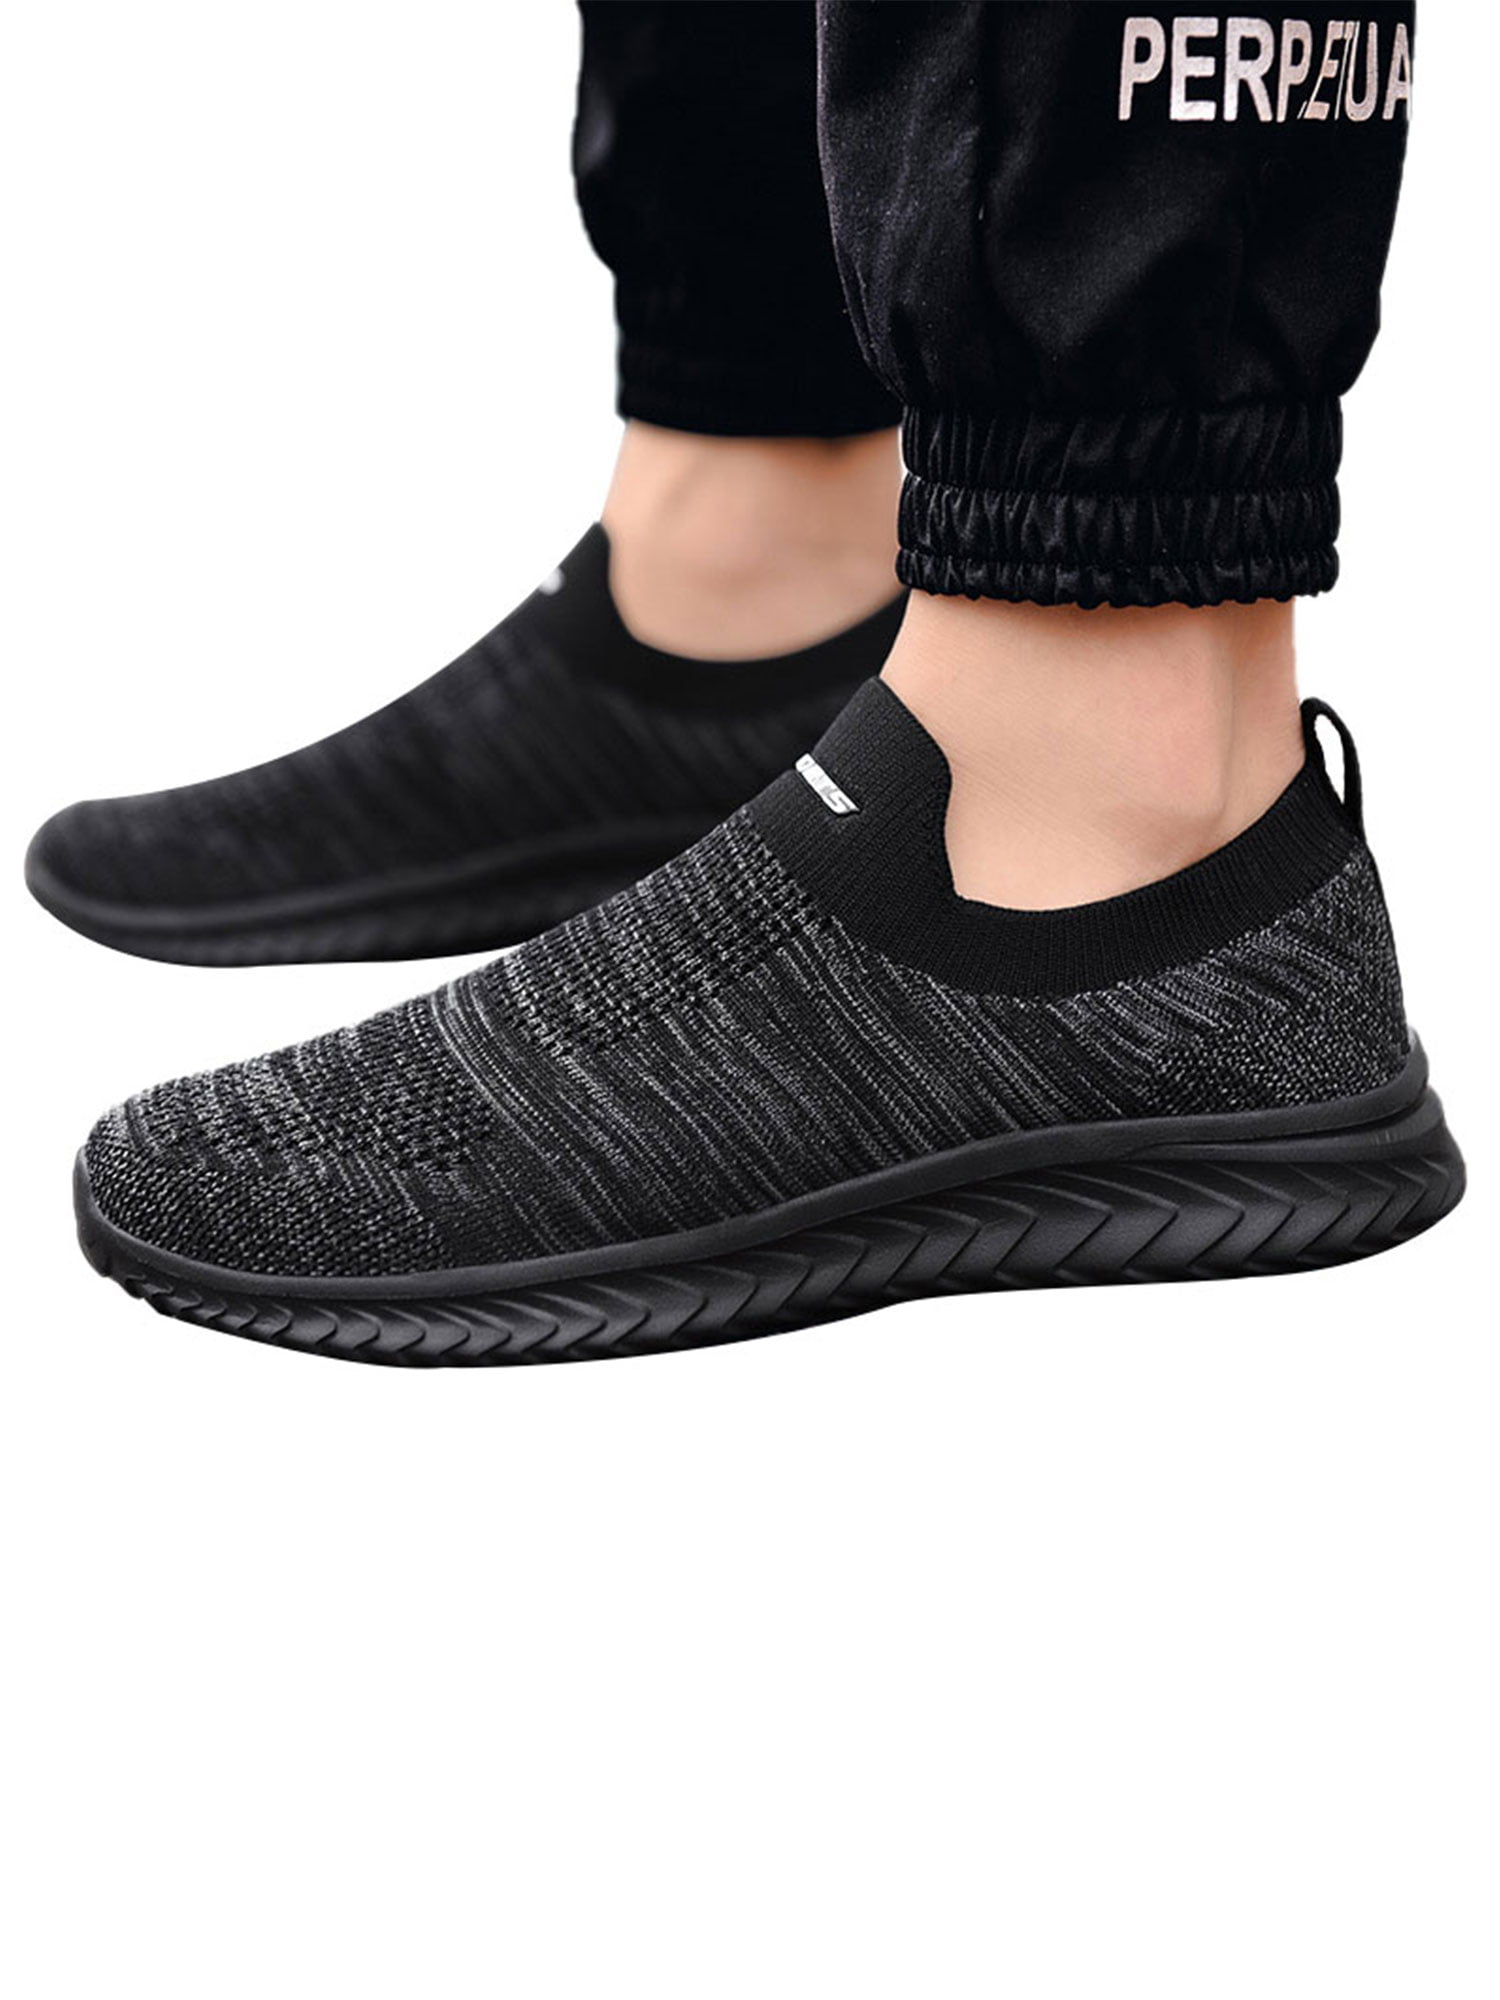 Voiv Womens Walking Shoes Mens Slip-on Sneakers Breathable Lightweight Athletic Running Shoes 